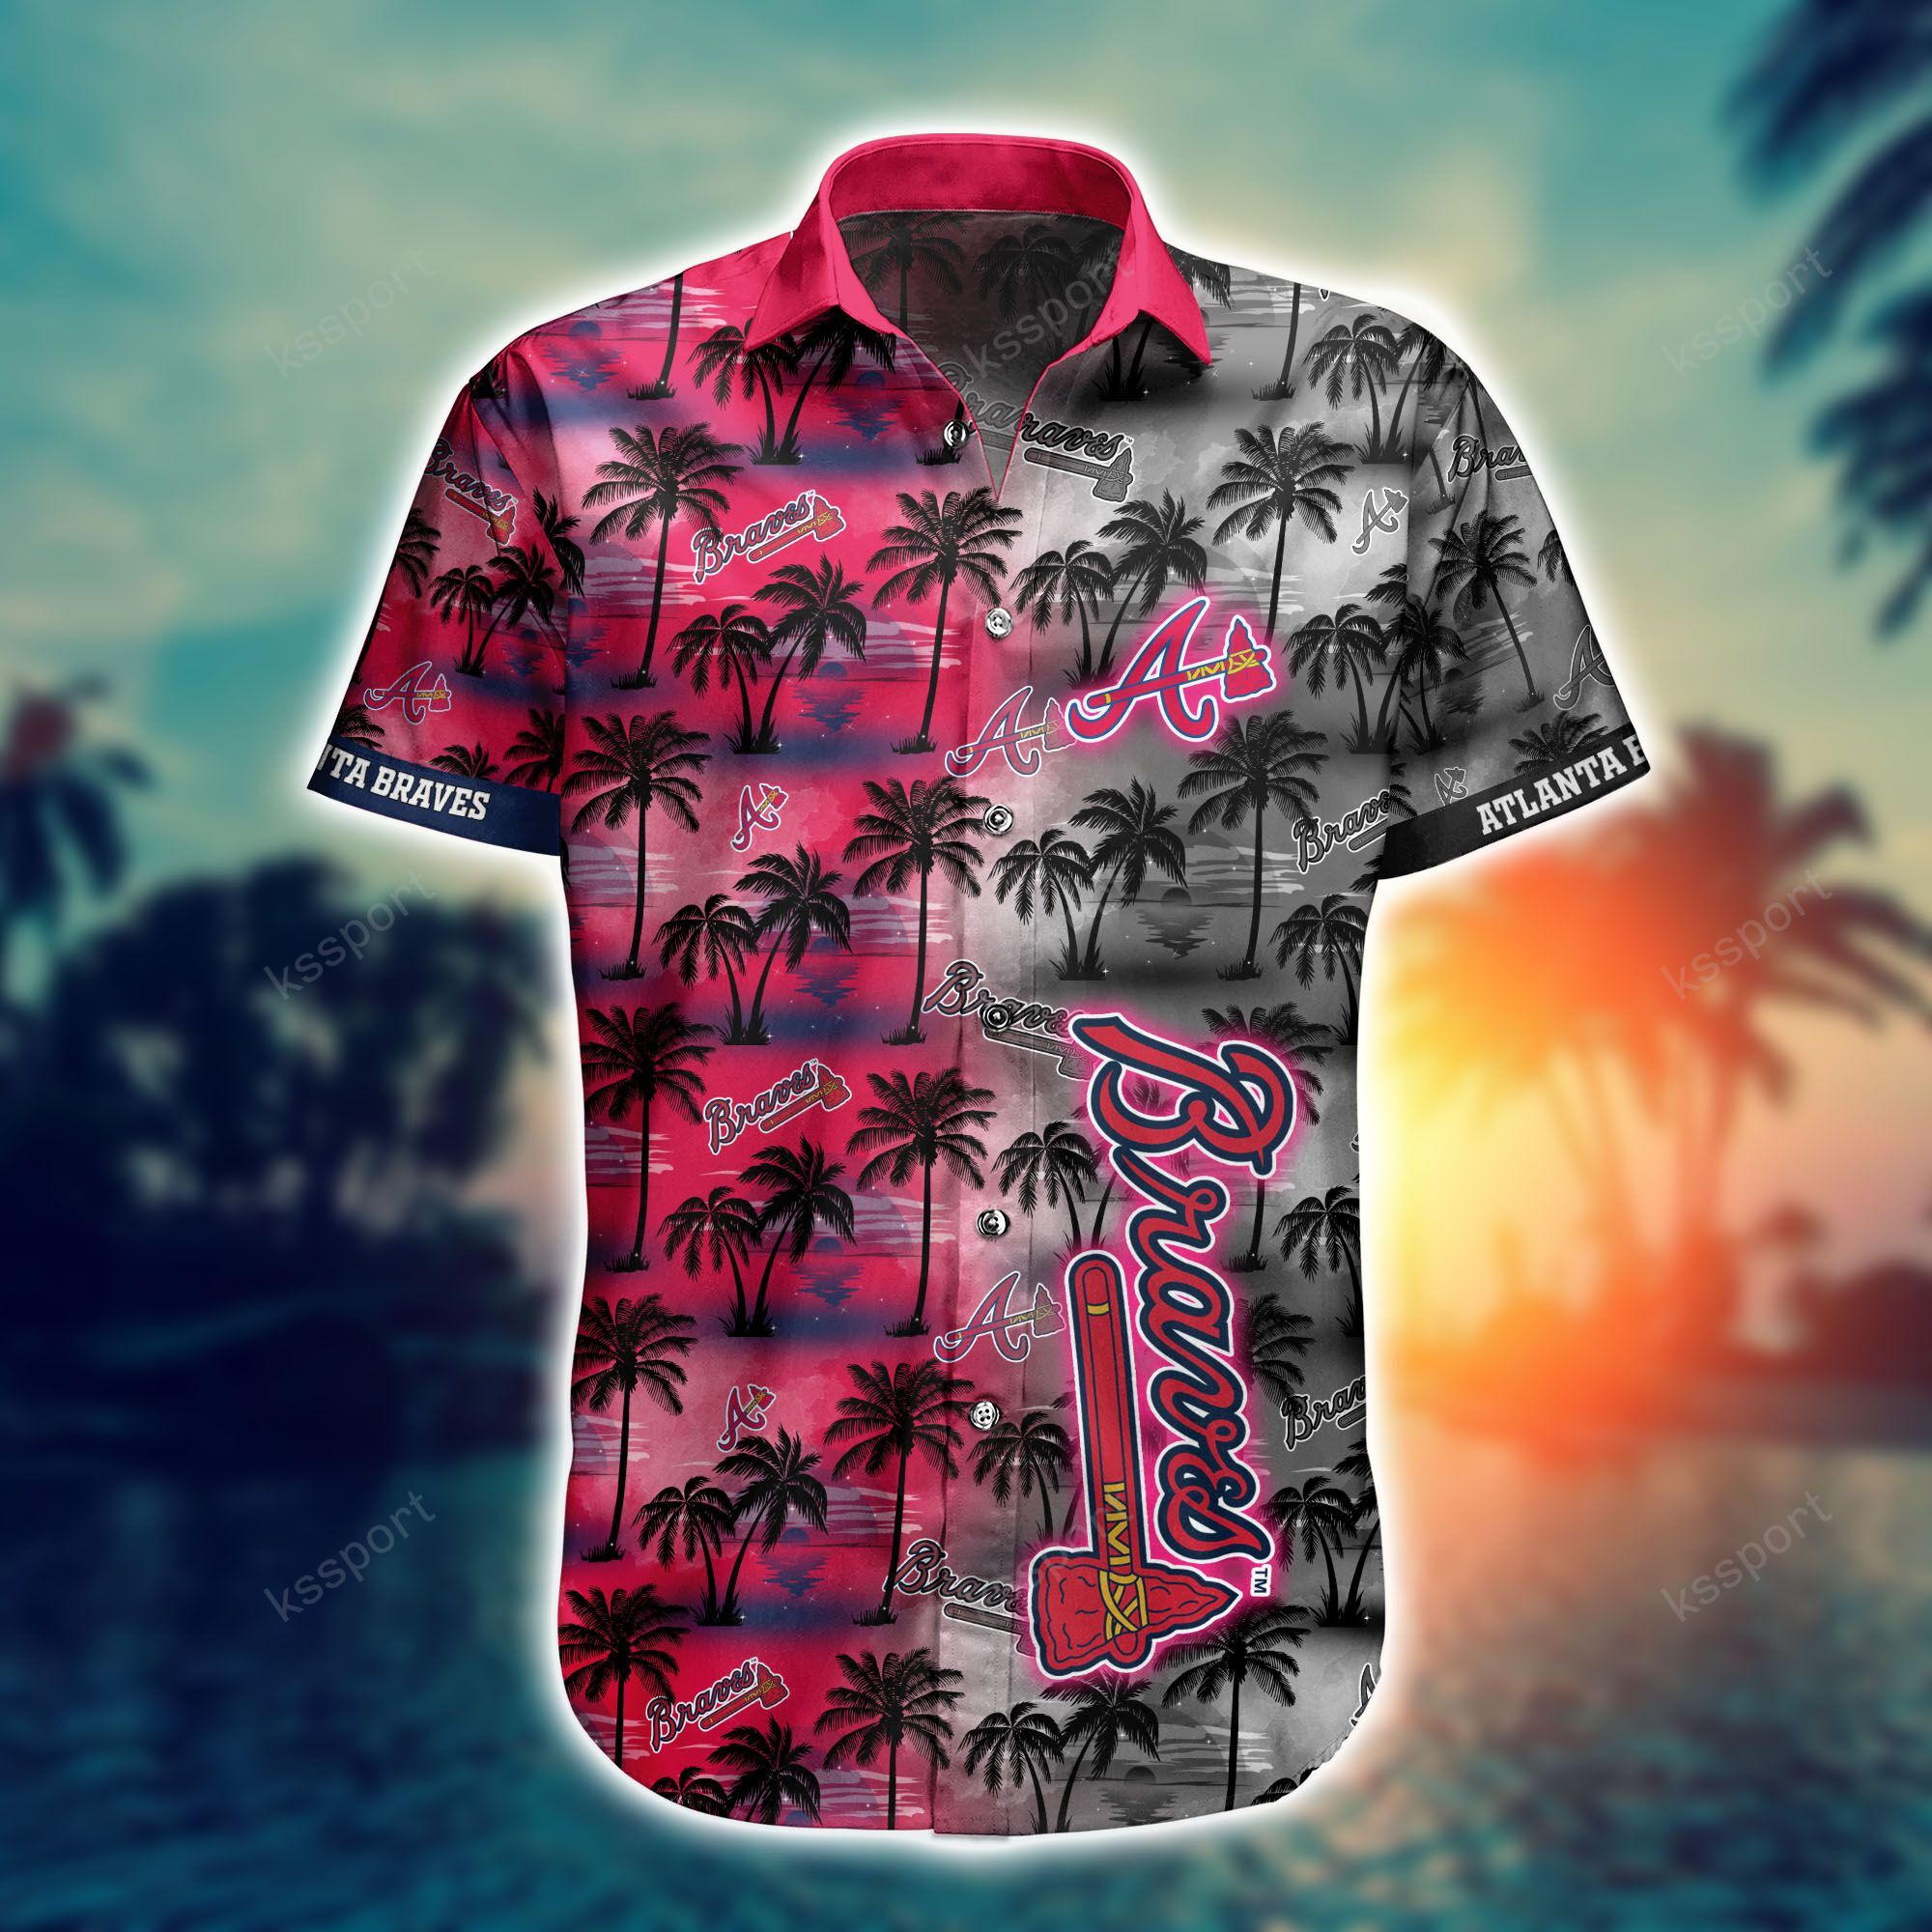 Top cool Hawaiian shirt 2022 - Make sure you get yours today before they run out! 231